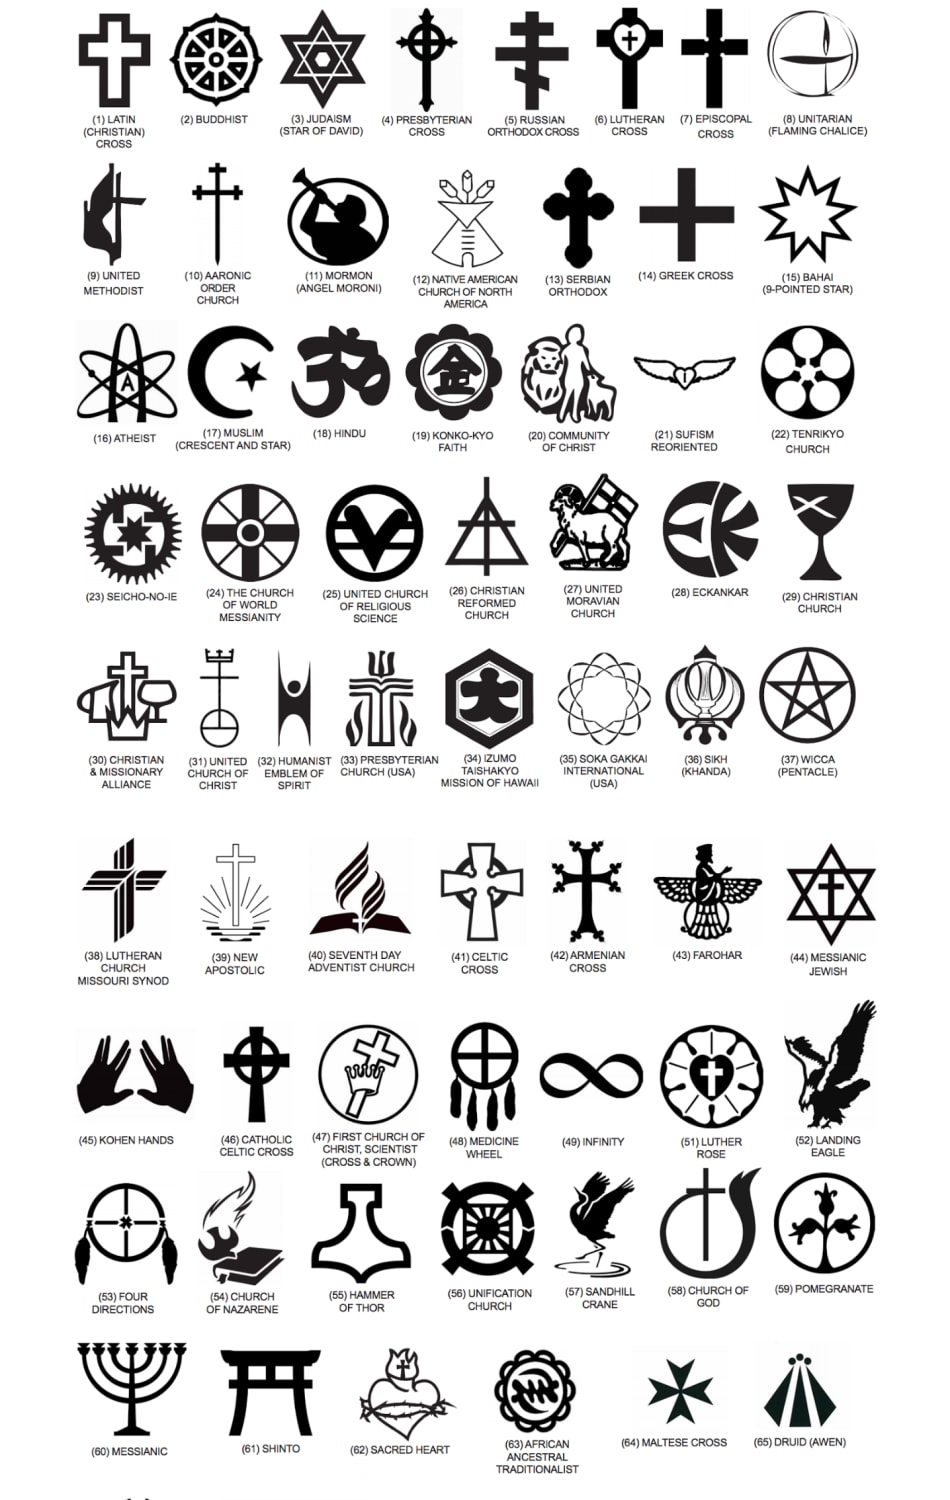 All tombstone symbols sanctioned by the USVA